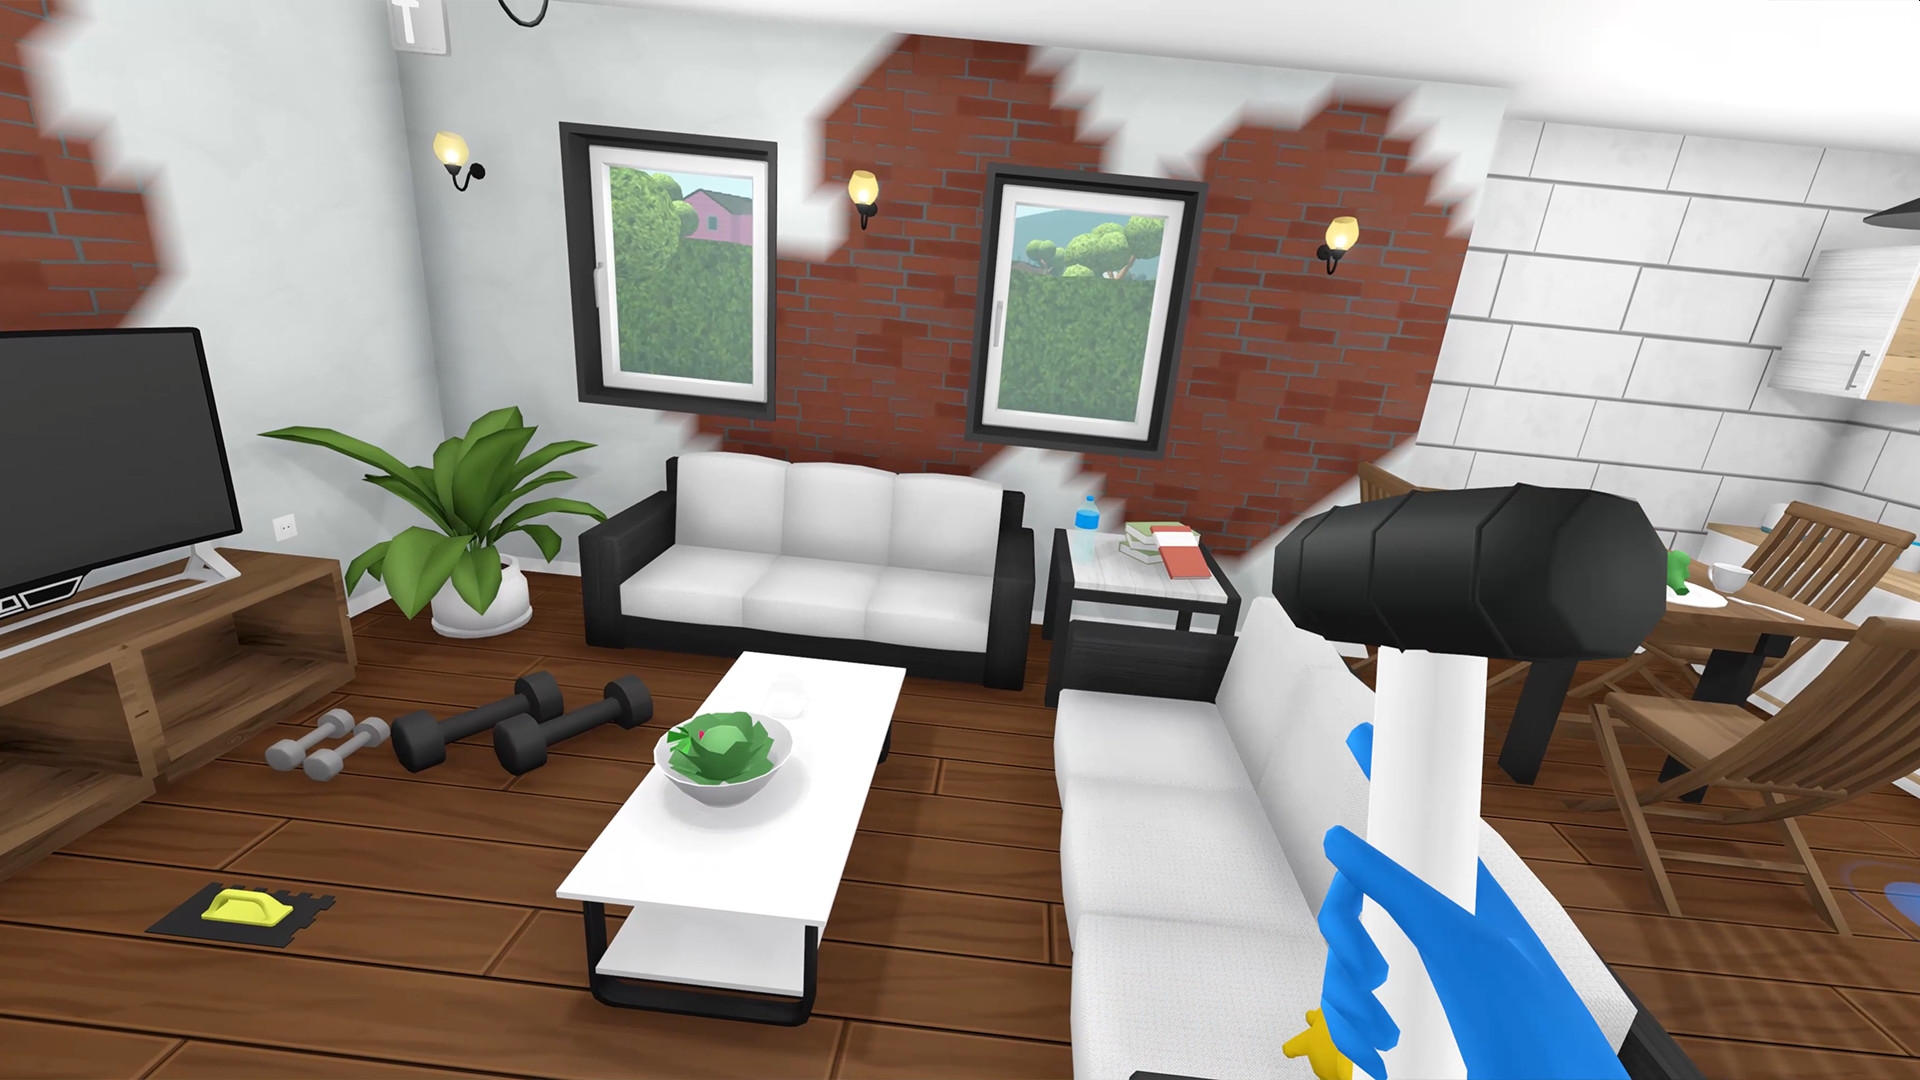 Frozen District’s House Flipper VR Makes Home Renovation More Realistic And Launches Tomorrow